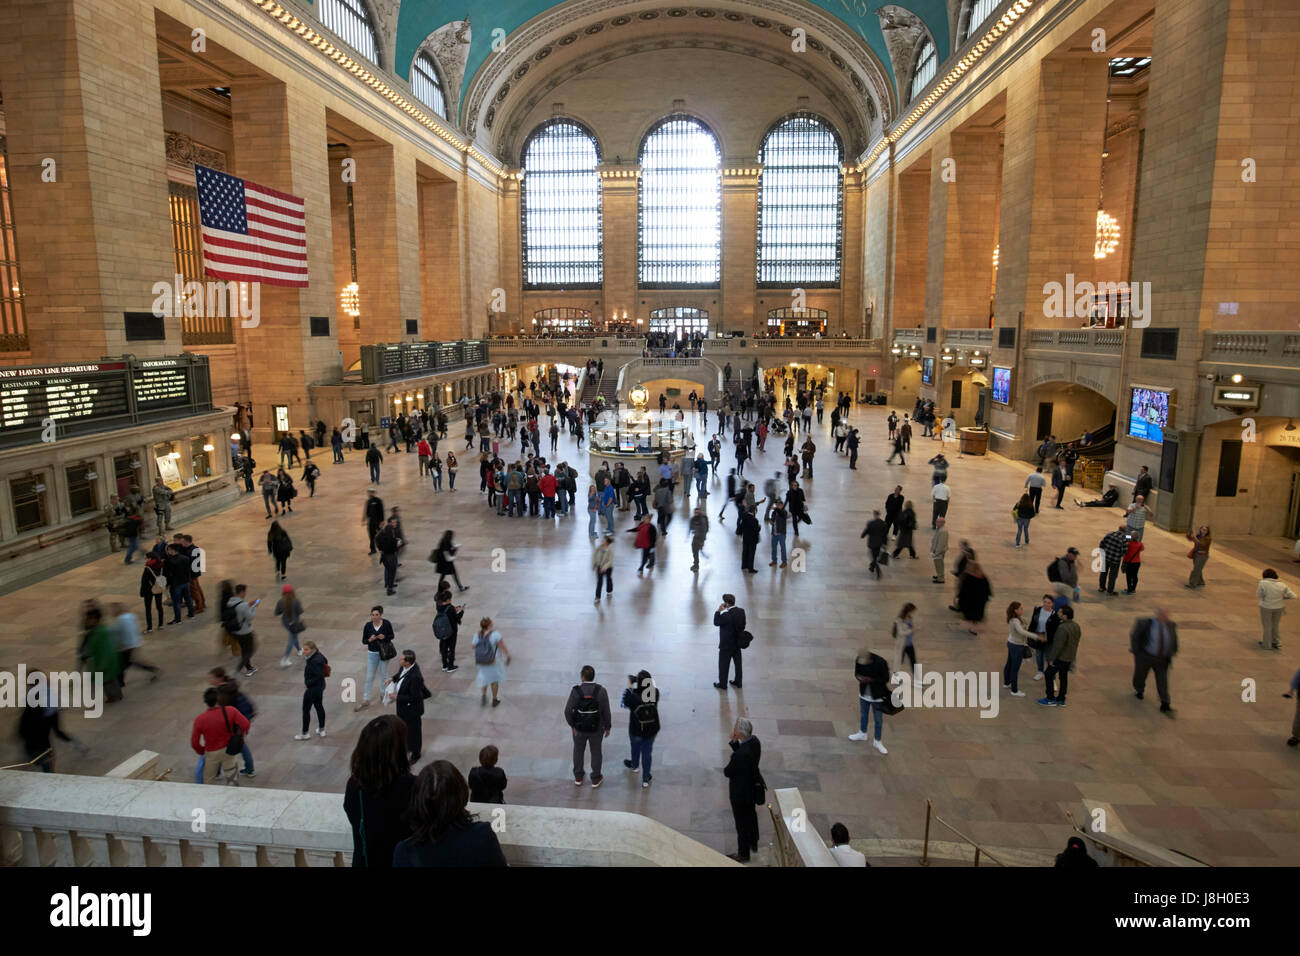 slow exposure of main concourse of grand central station New York City USA Stock Photo